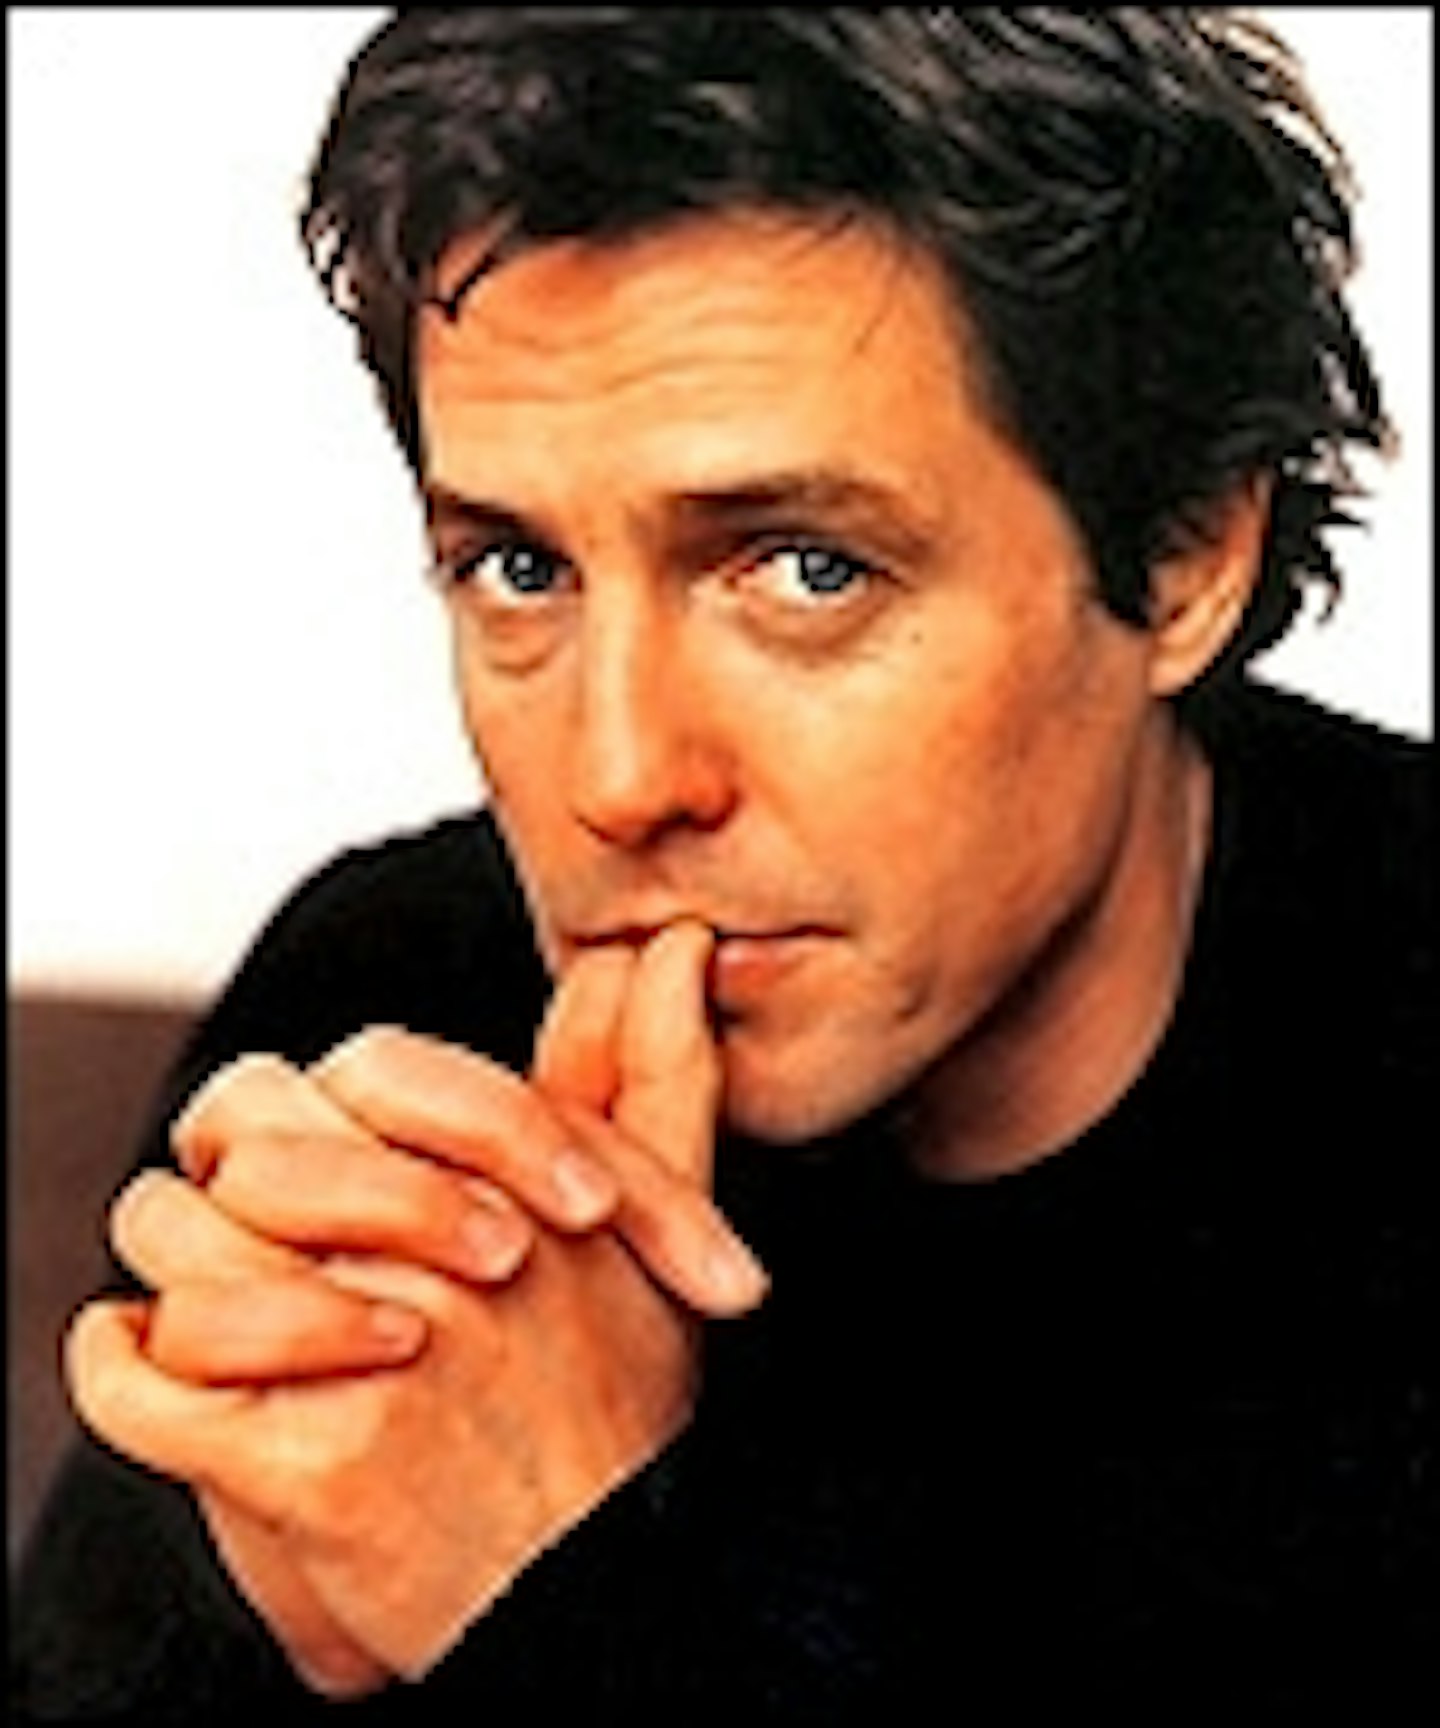 Hugh Grant And SJP To Co-Star